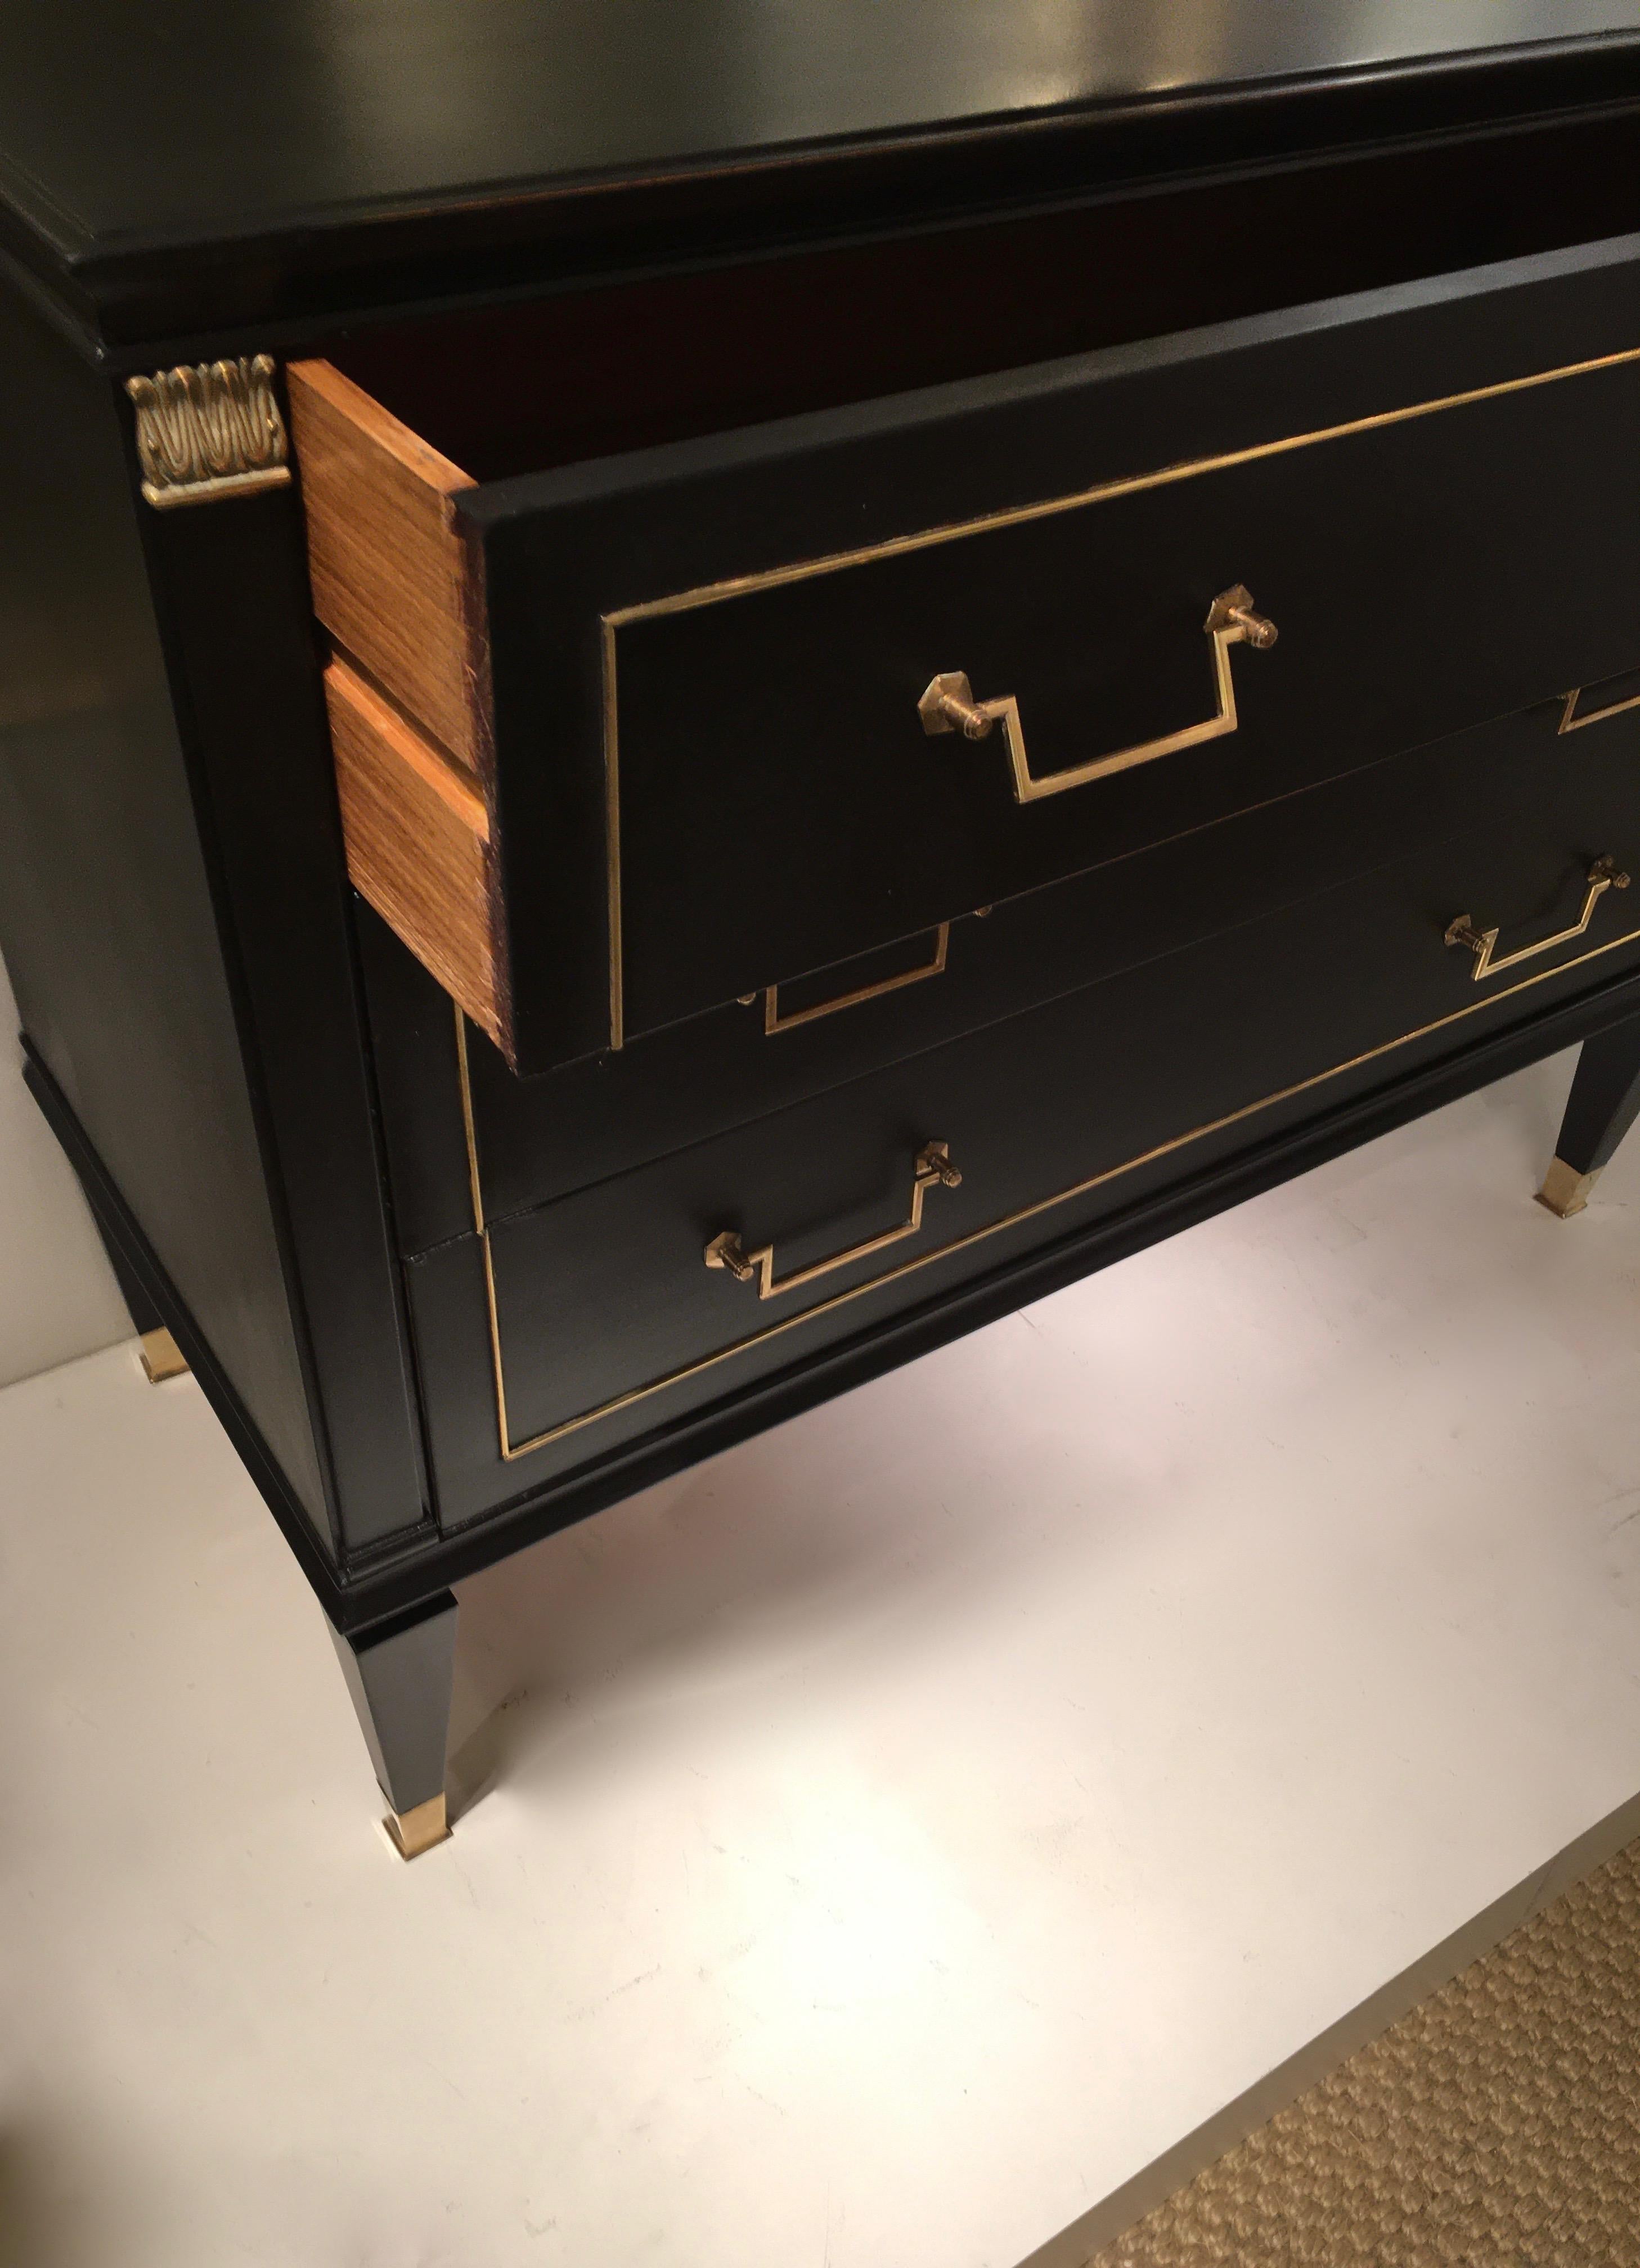 Fine chest of drawers with brass details, Louis XVI style.
Black lacquer, three drawers, elegant neoclassical feet with brass sabots.
By Jacques Quinet, France, 1948.